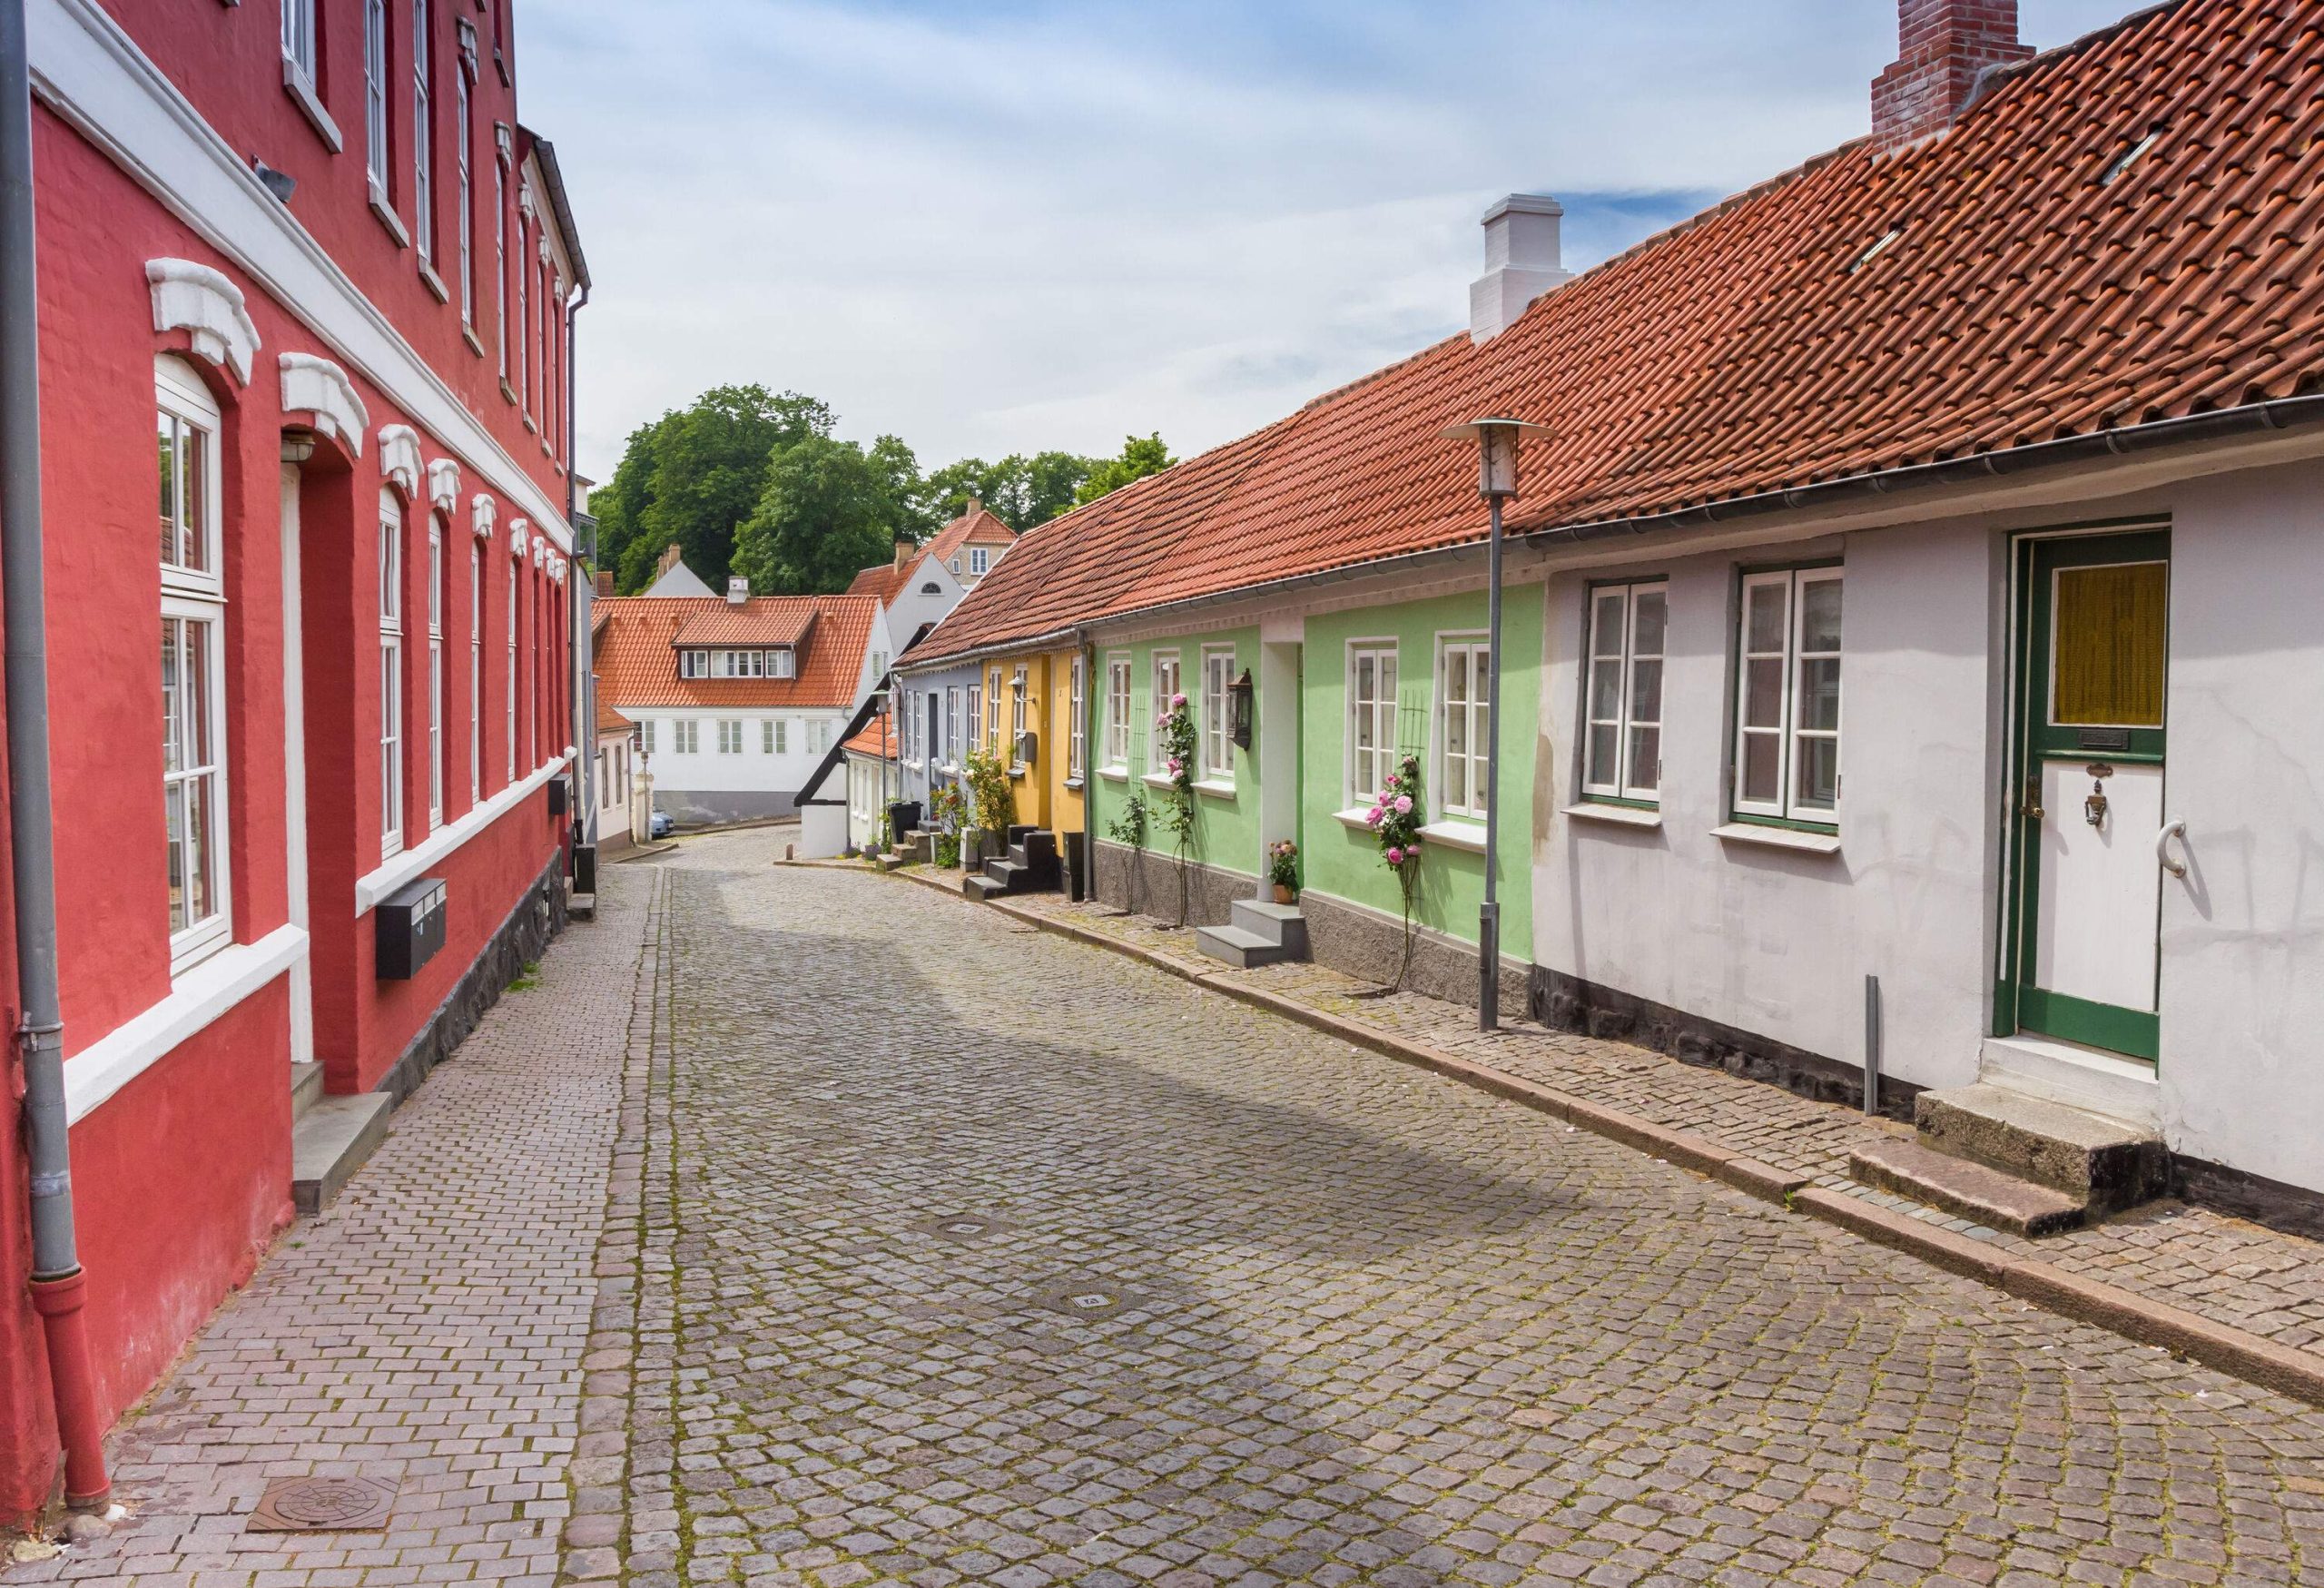 Colourful buildings and tiled-roof houses along a cobblestone path.